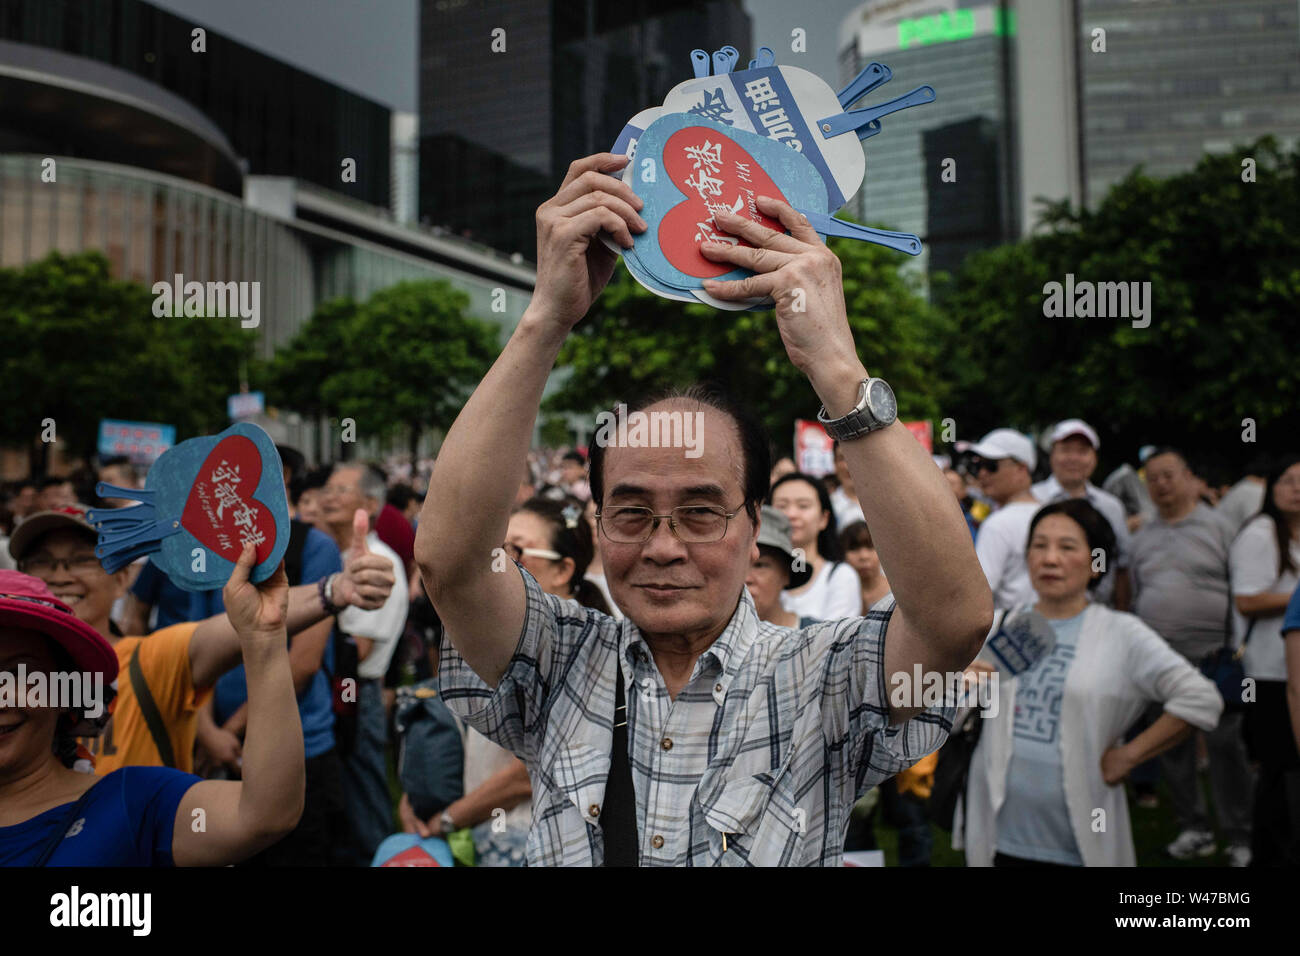 A man distributes fans with  Safeguard HK during pro-government  Safeguard Hong Kong rally at Tamar Park.Government supporters show up in number of tens of thousands in a pro-police rally, at Tamar Park.  Named Safeguard Hong Kong,  the demonstration was co-organized by 70 pro-Beijing figures and  was attended by local residents, mainland immigrants, members of ethnic minorities, as well as visitors from across the border. Stock Photo